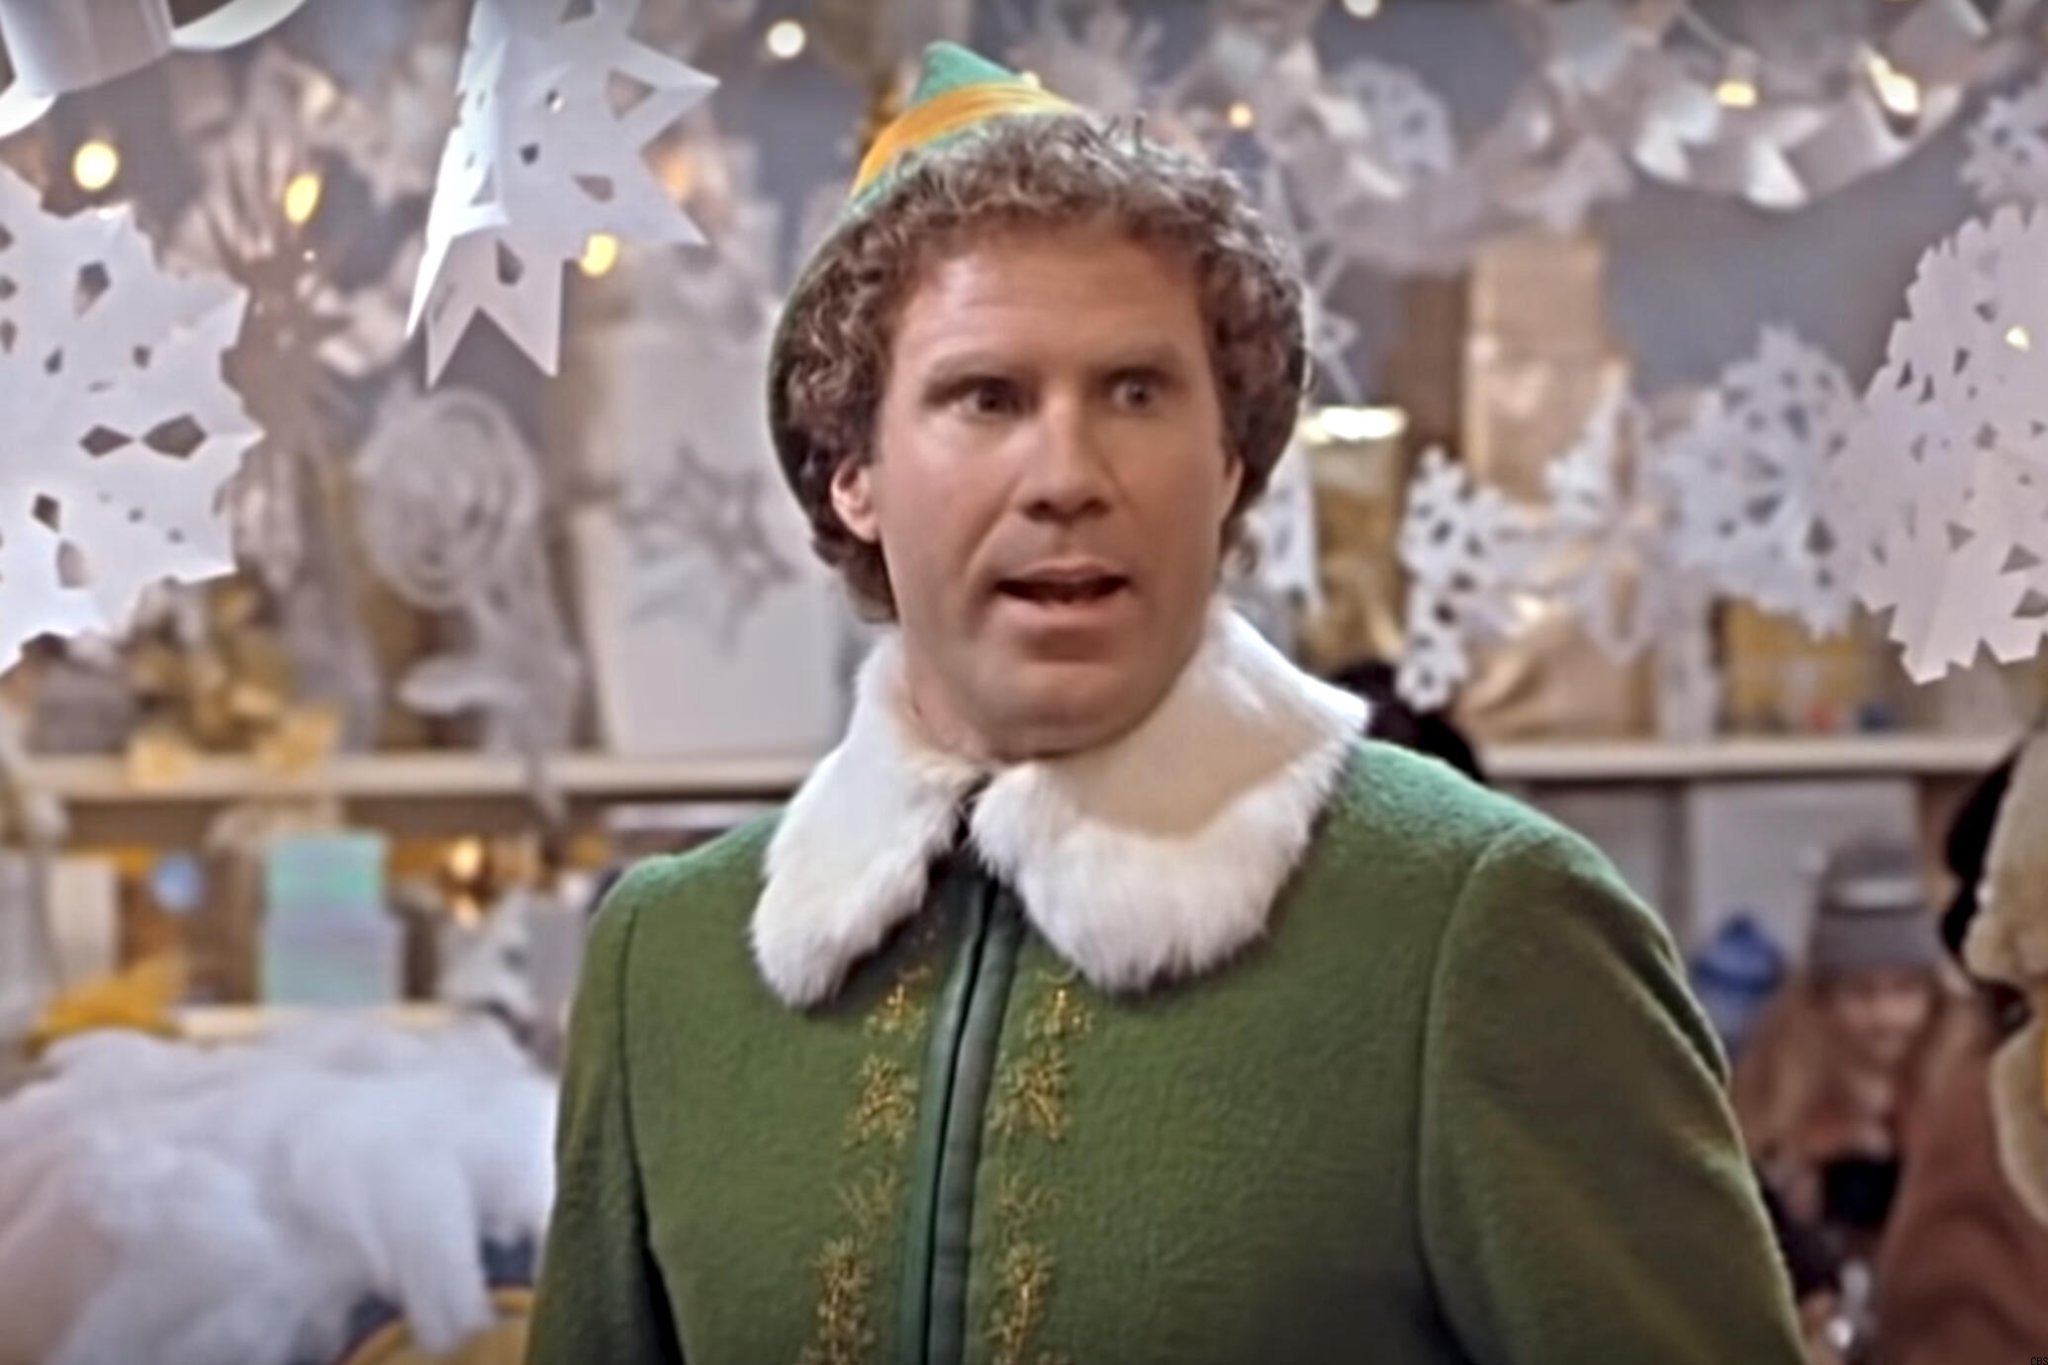 11 Great Christmas Movies and Specials to Stream This Holiday Season